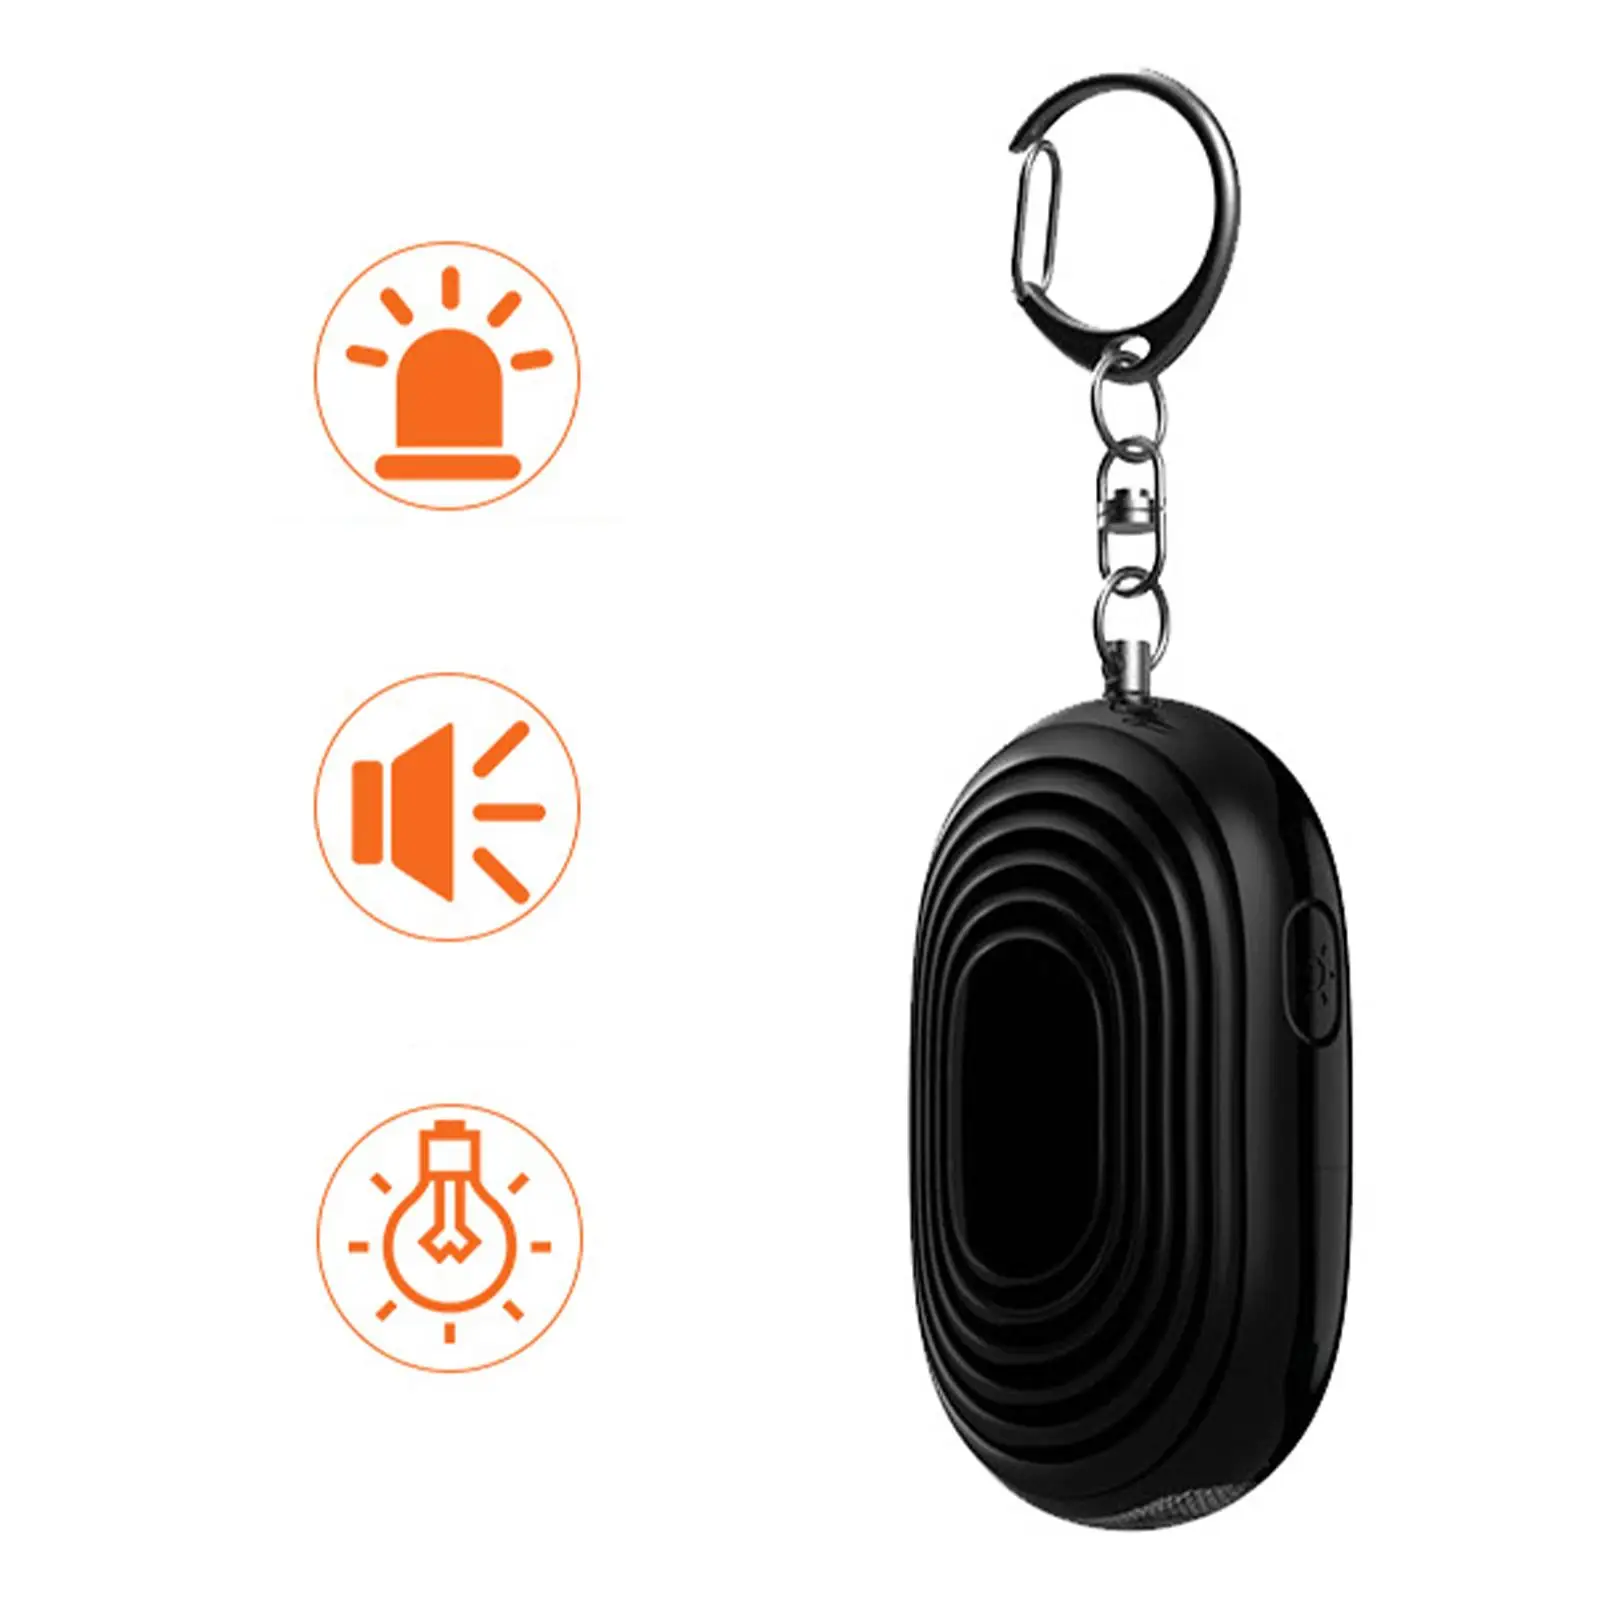 Safe Personal Alarm Loud with LED Night Light 120dB Security Alarm Keychain for Women Hiking Traveling Night Running Camping